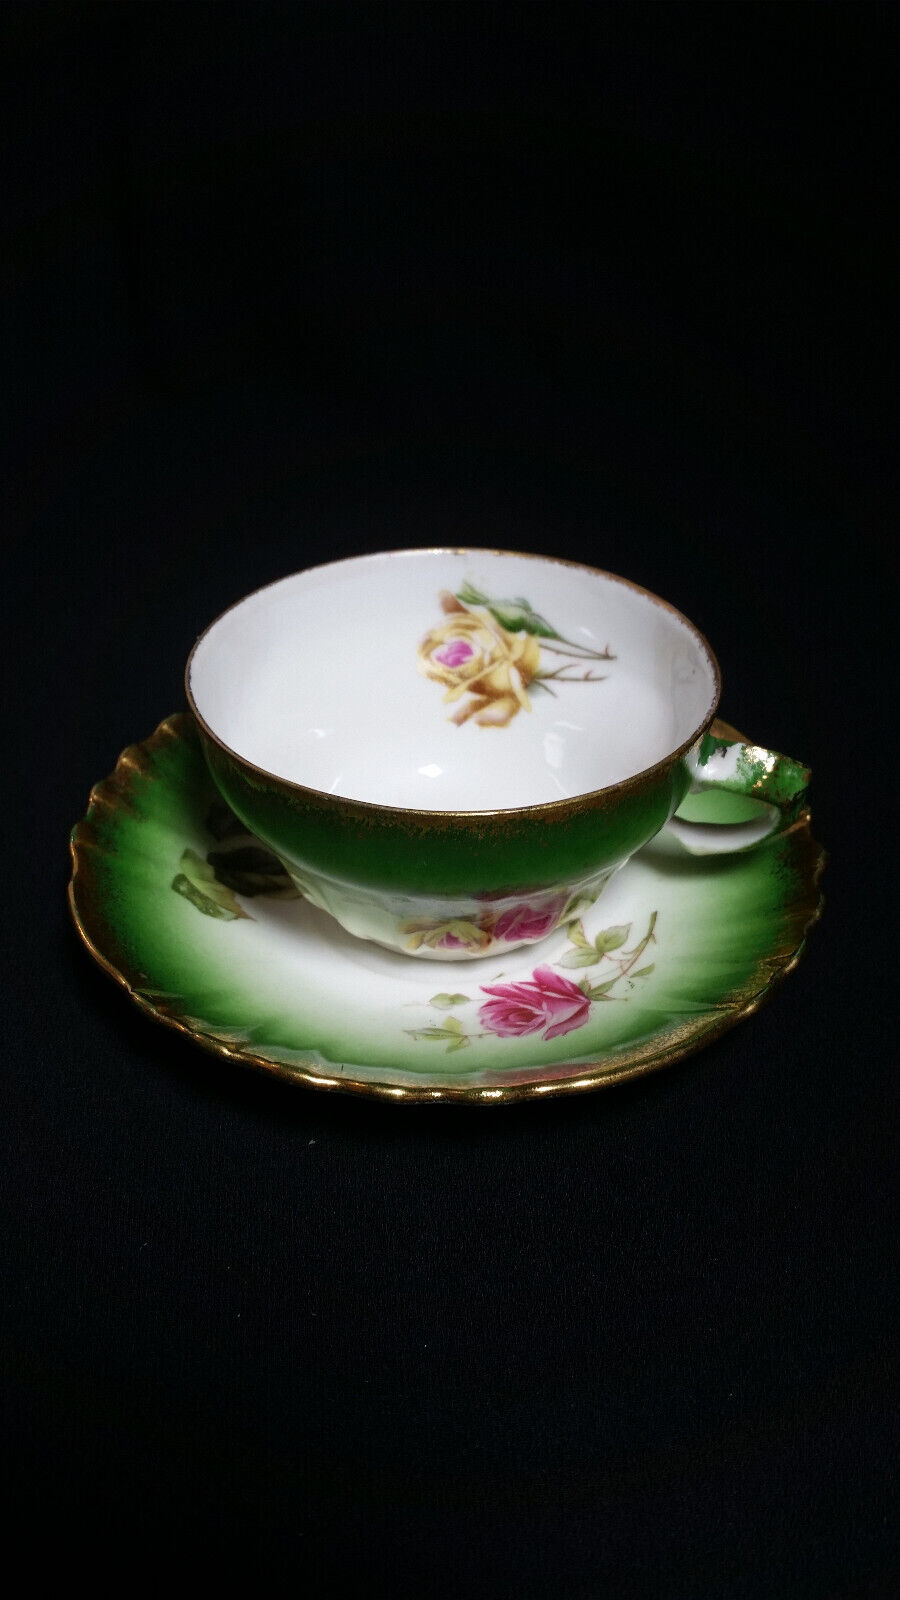 VINTAGE IMPERIAL AUSTRIA TEA CUP AND SAUCER SET GREEN PINK ROSES GOLD TRIM